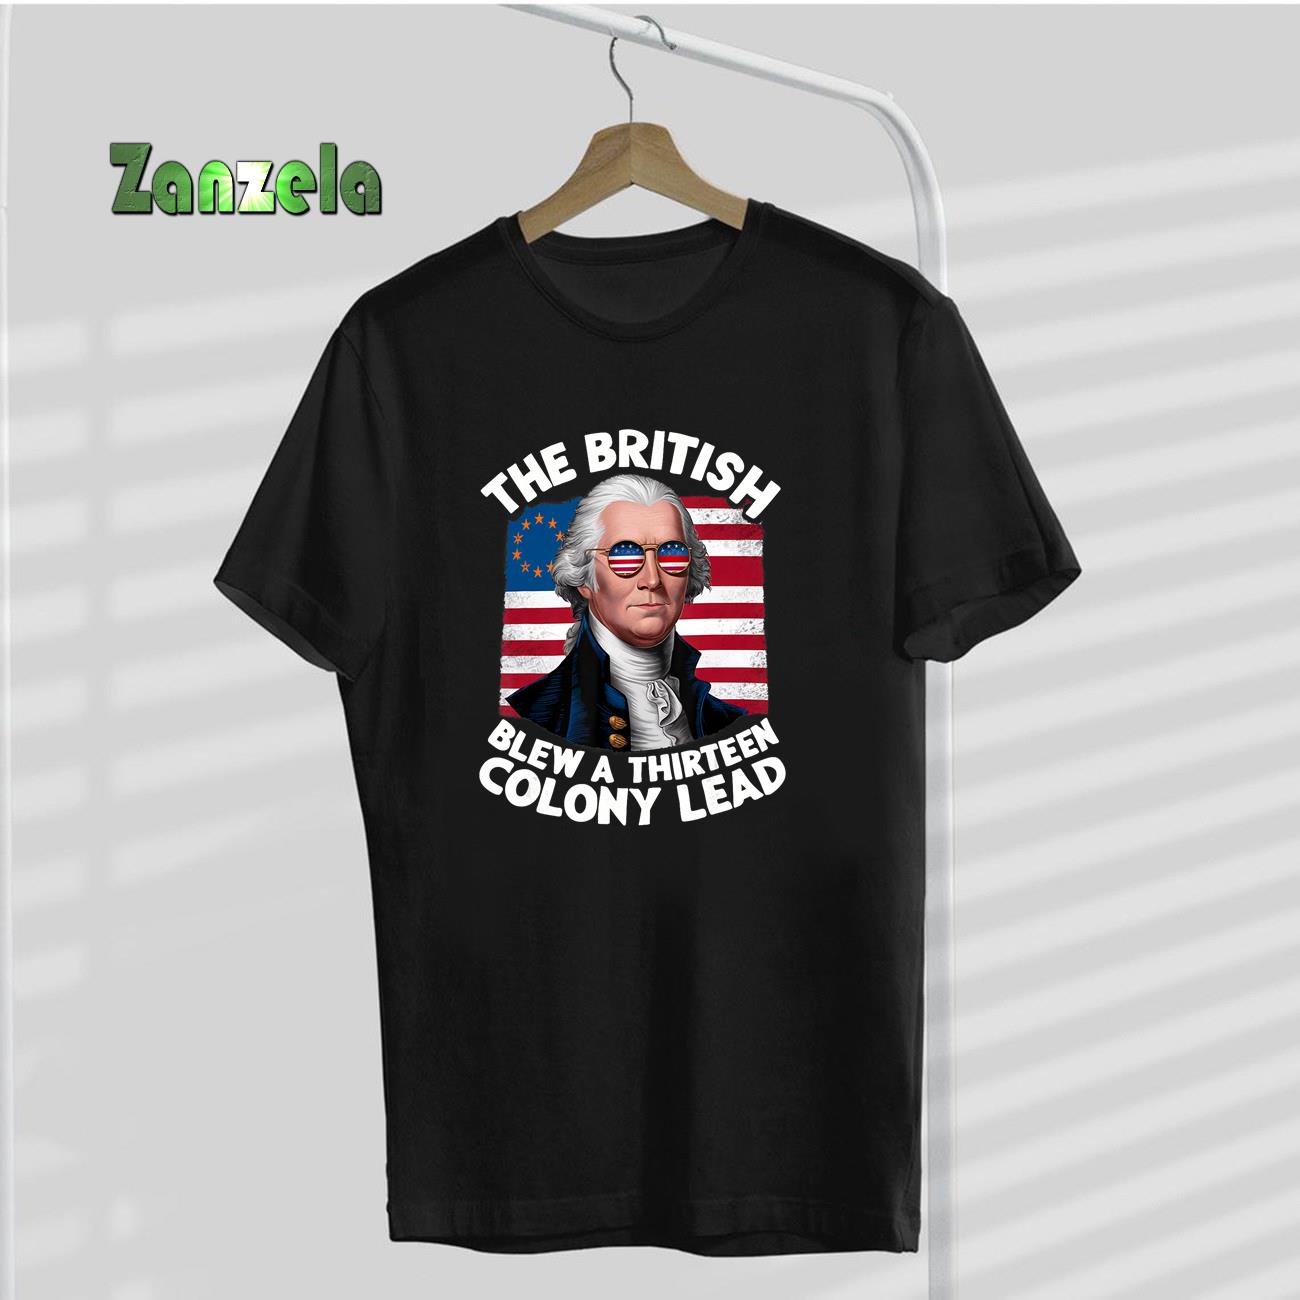 Betsy Ross Flag The British Blew a 13 Colony Lead T-Shirt